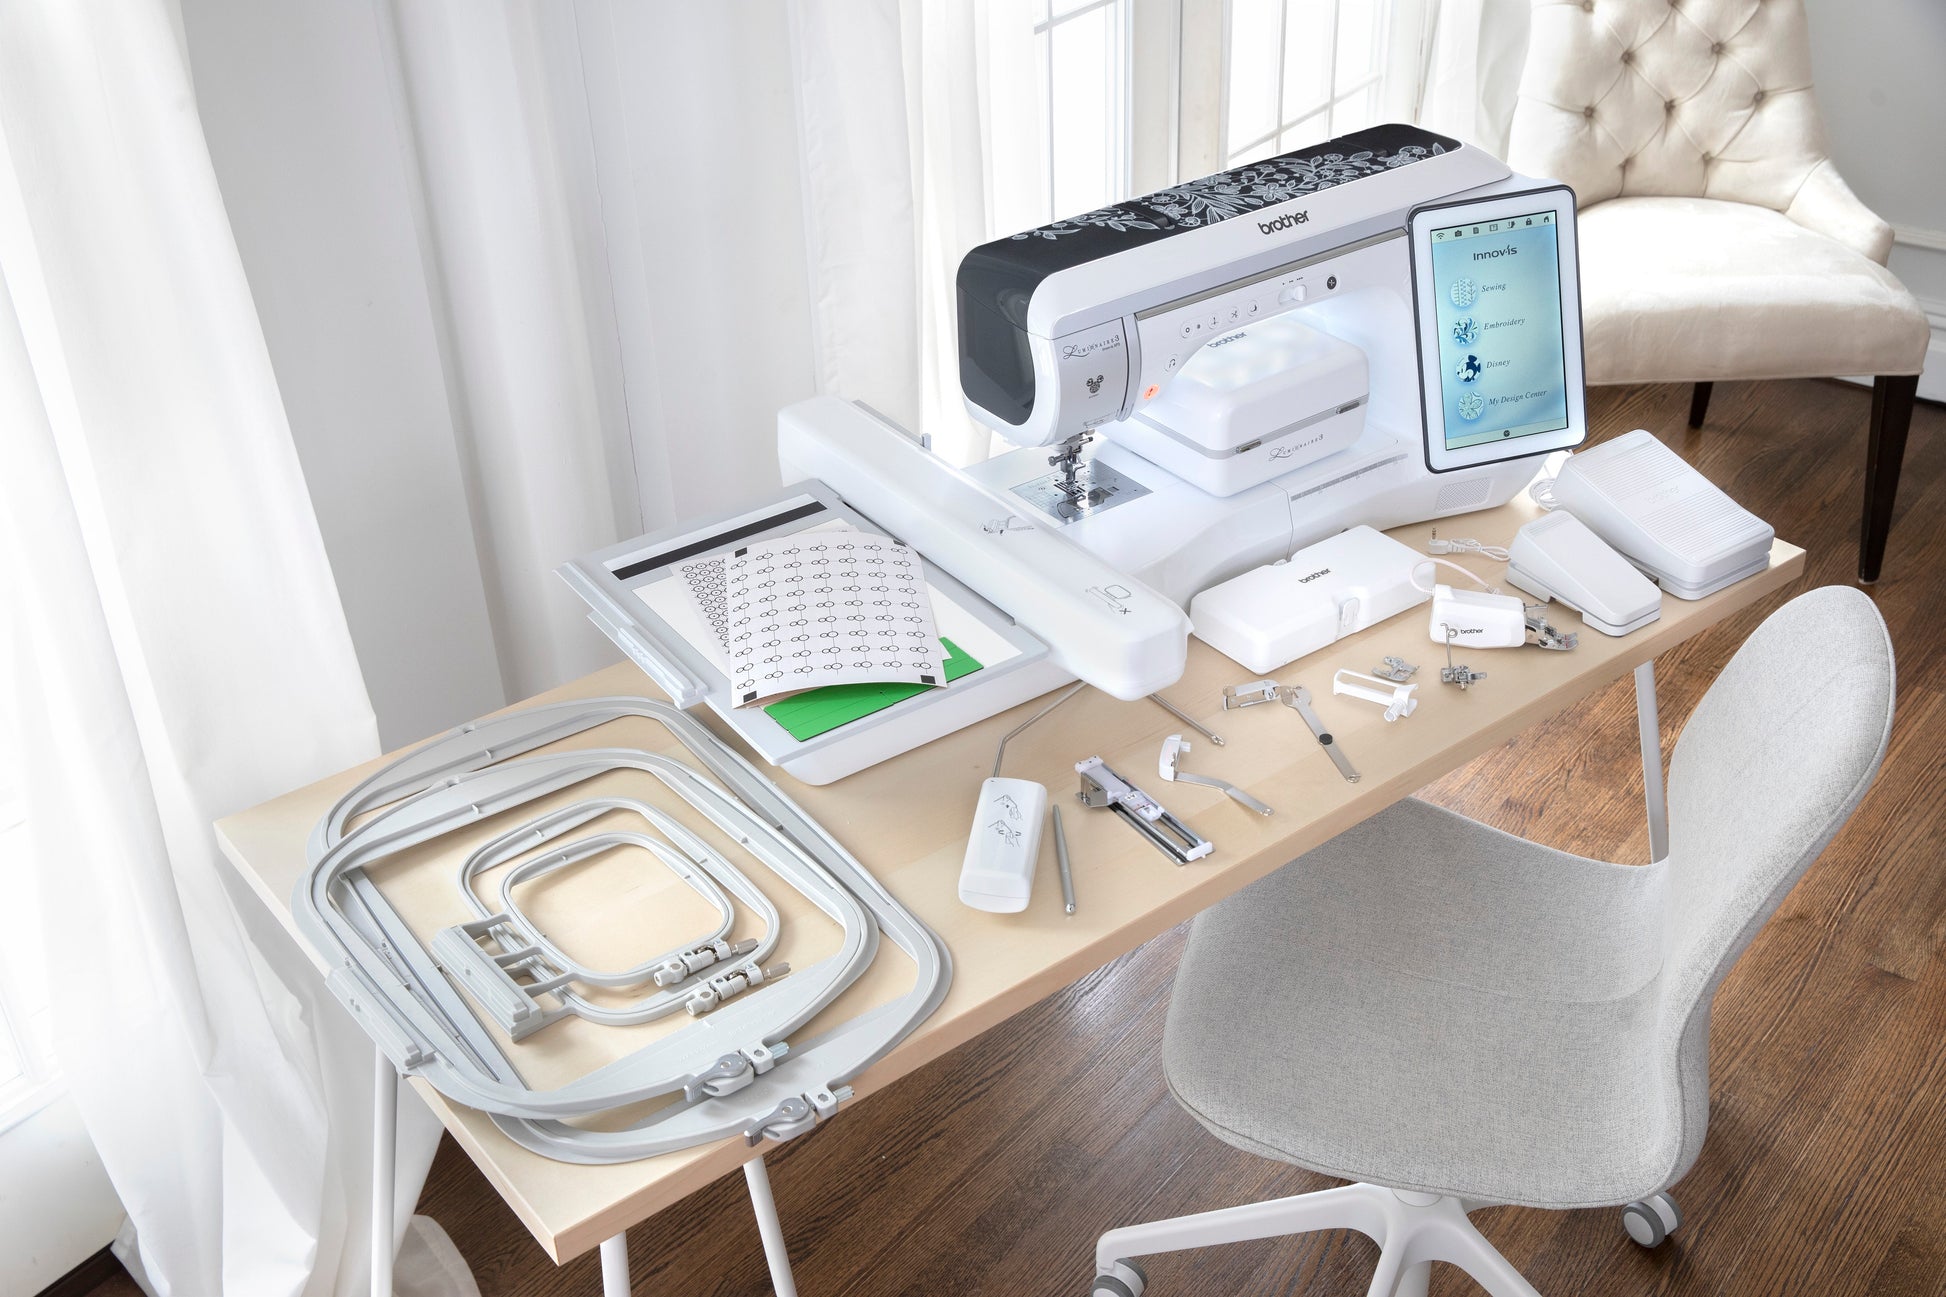 Brother Luminaire 3 Innov-ís XP3 Sewing, Quilting and Embroidery Machine -  012502669951